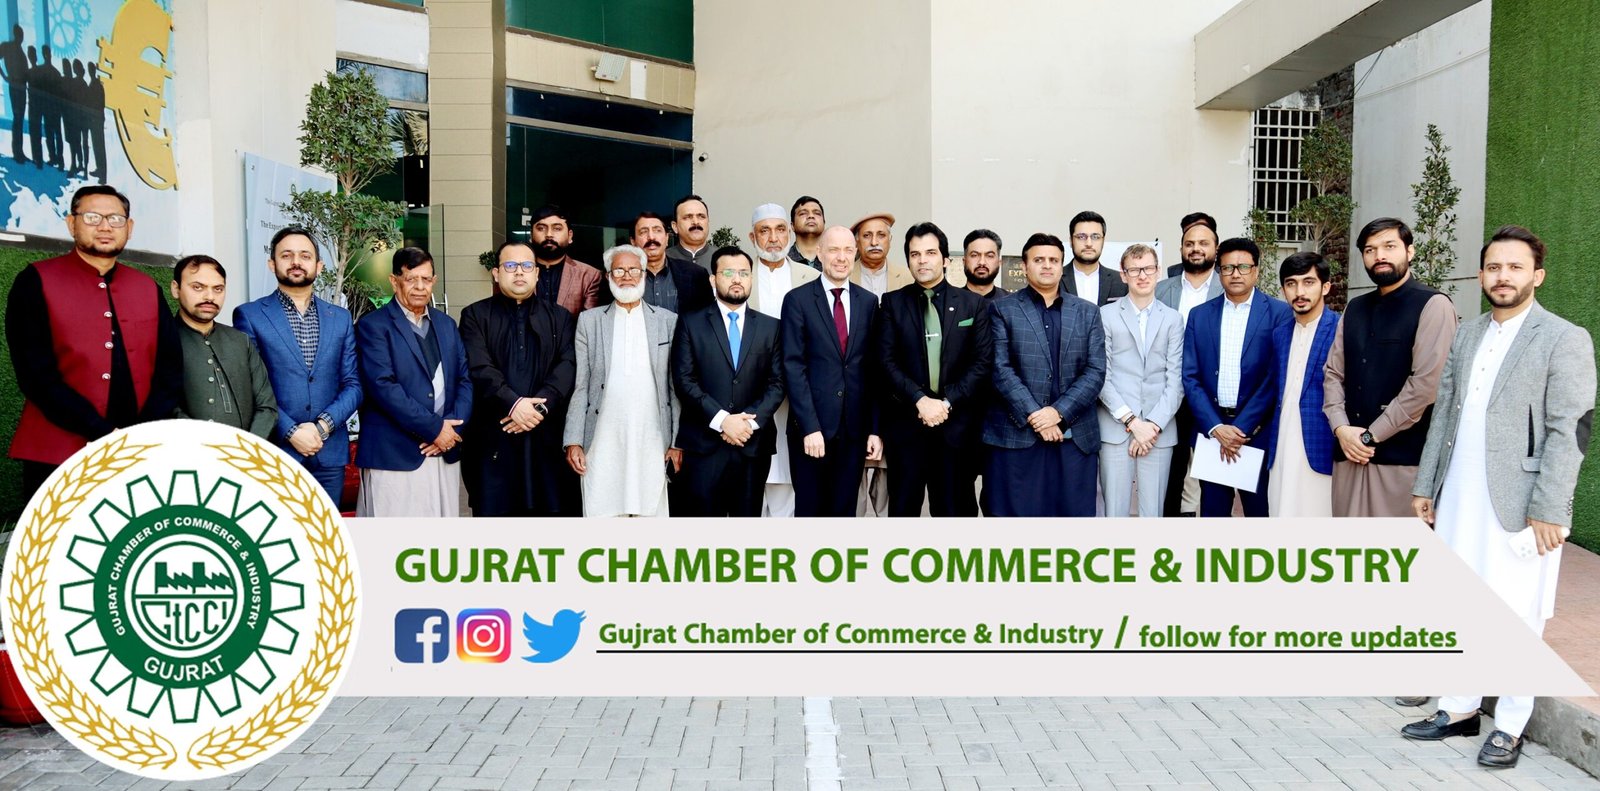 H.E Mr. Jakob Linulf #Ambassador of #Denmark to #Pakistan visited Gujrat Chamber of Commerce & Industry and had a meeting with Business Community of Gujrat under the Presidency of Mr. Sikander Ishfaq Razi #President and Mr. Masoom Qamar #Vice_President.